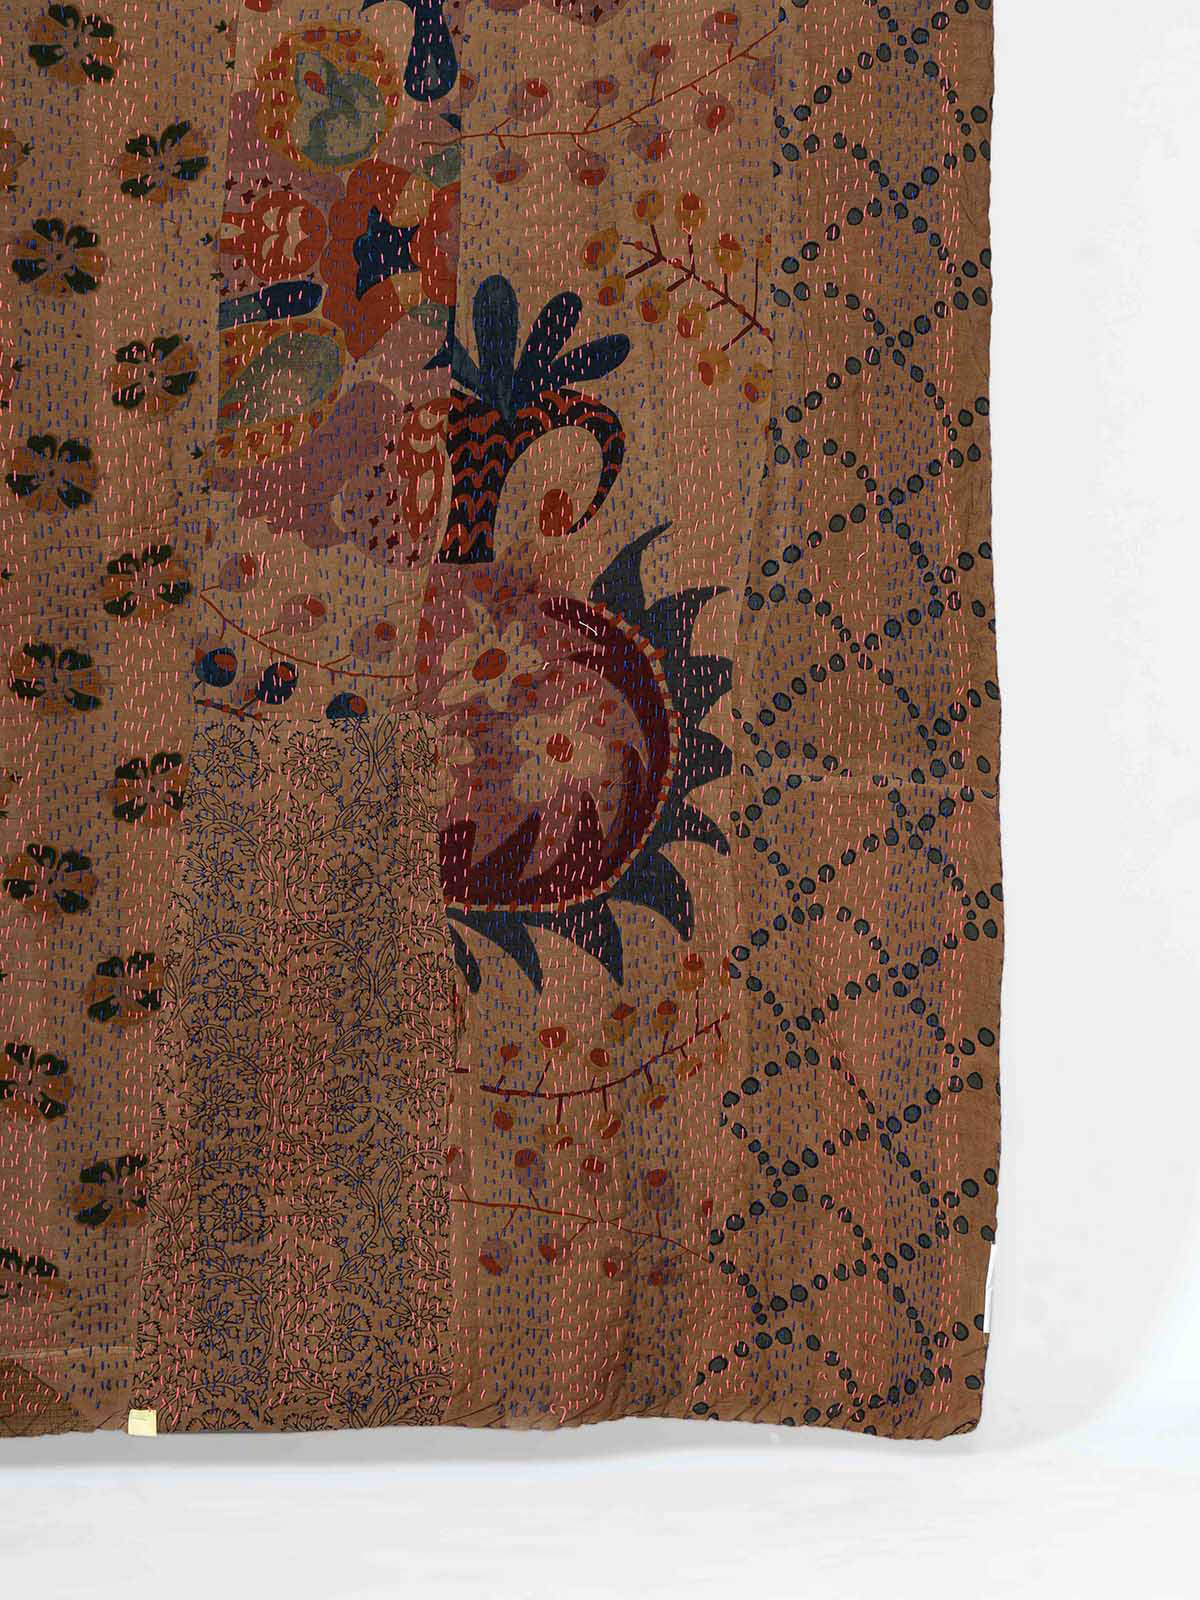 Comino Assorted Printed Patch Kantha Throw